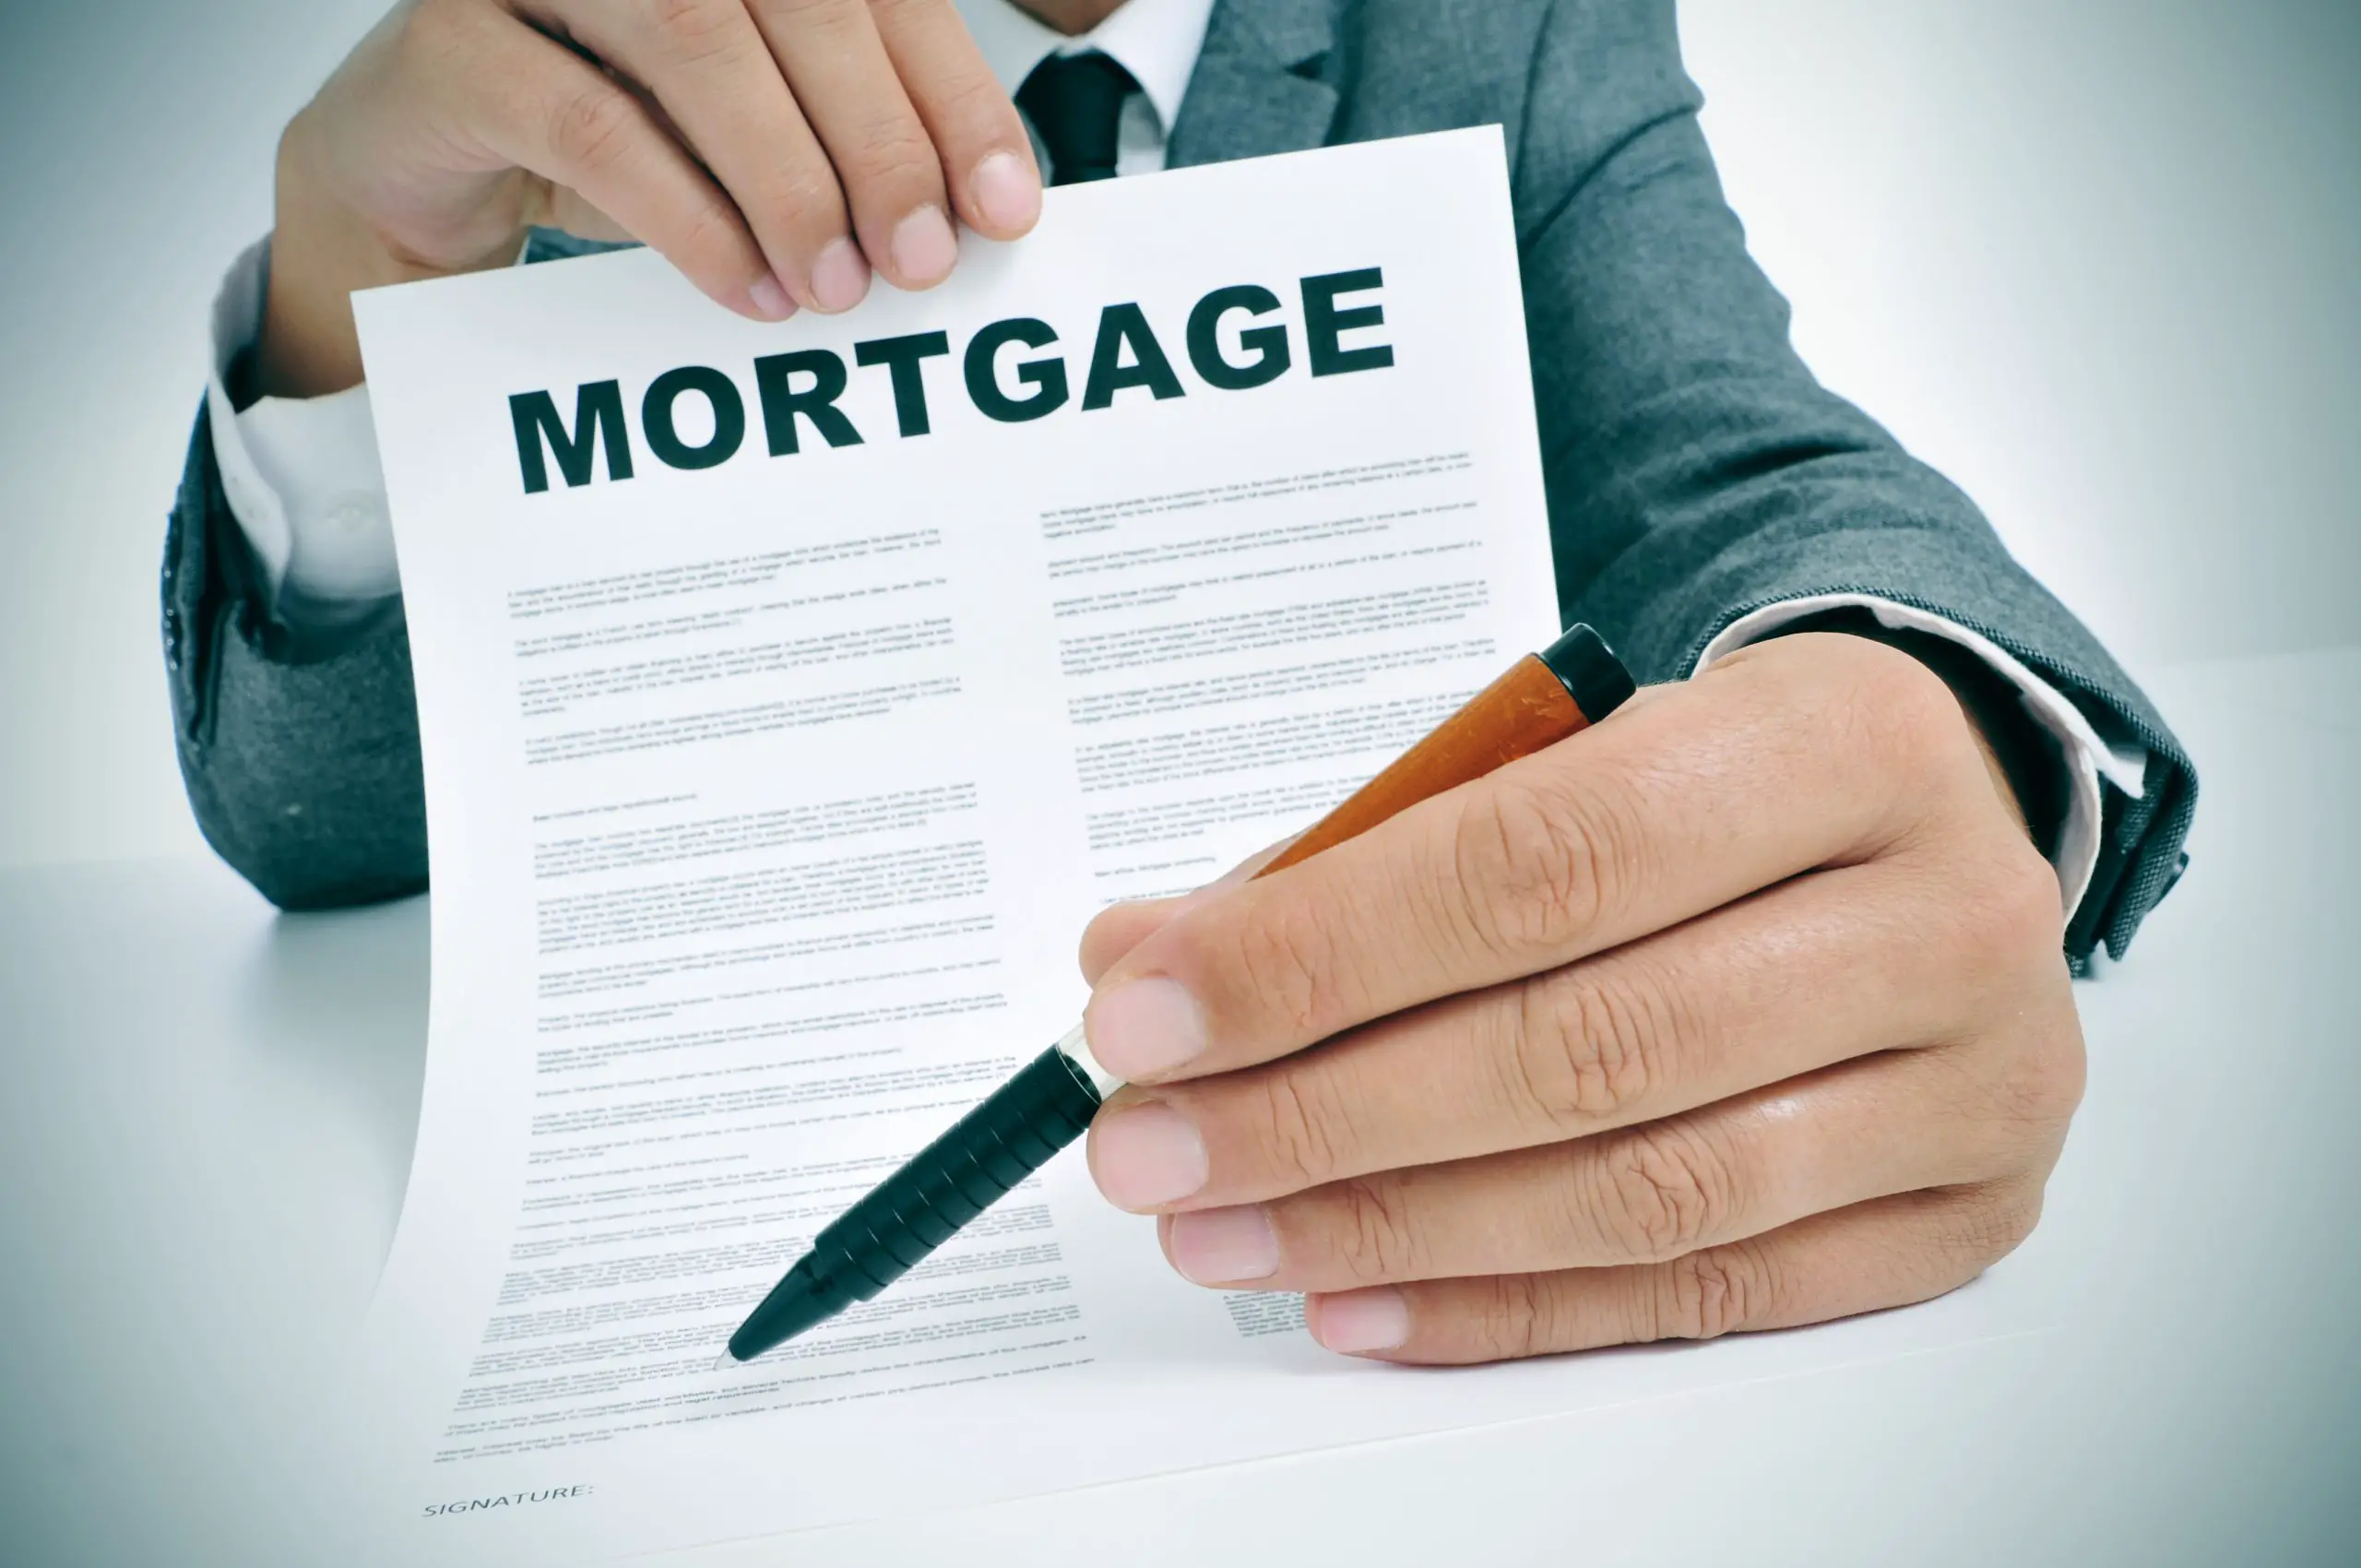 How To Get a Mortgage If You Are Self